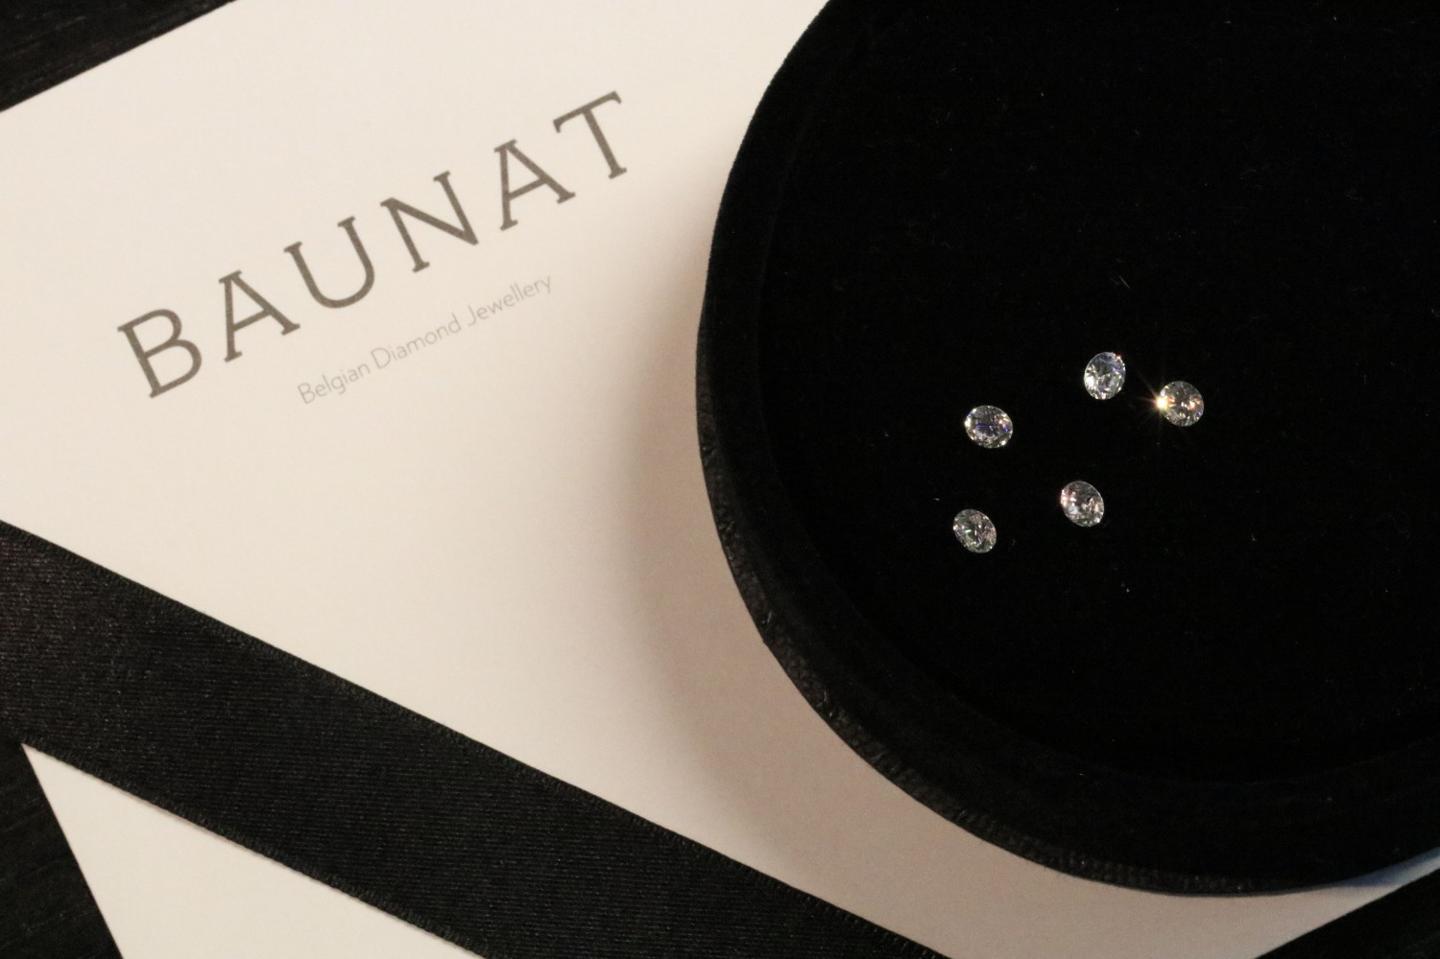 A selection of loose diamonds for your unique diamond ring by BAUNAT.